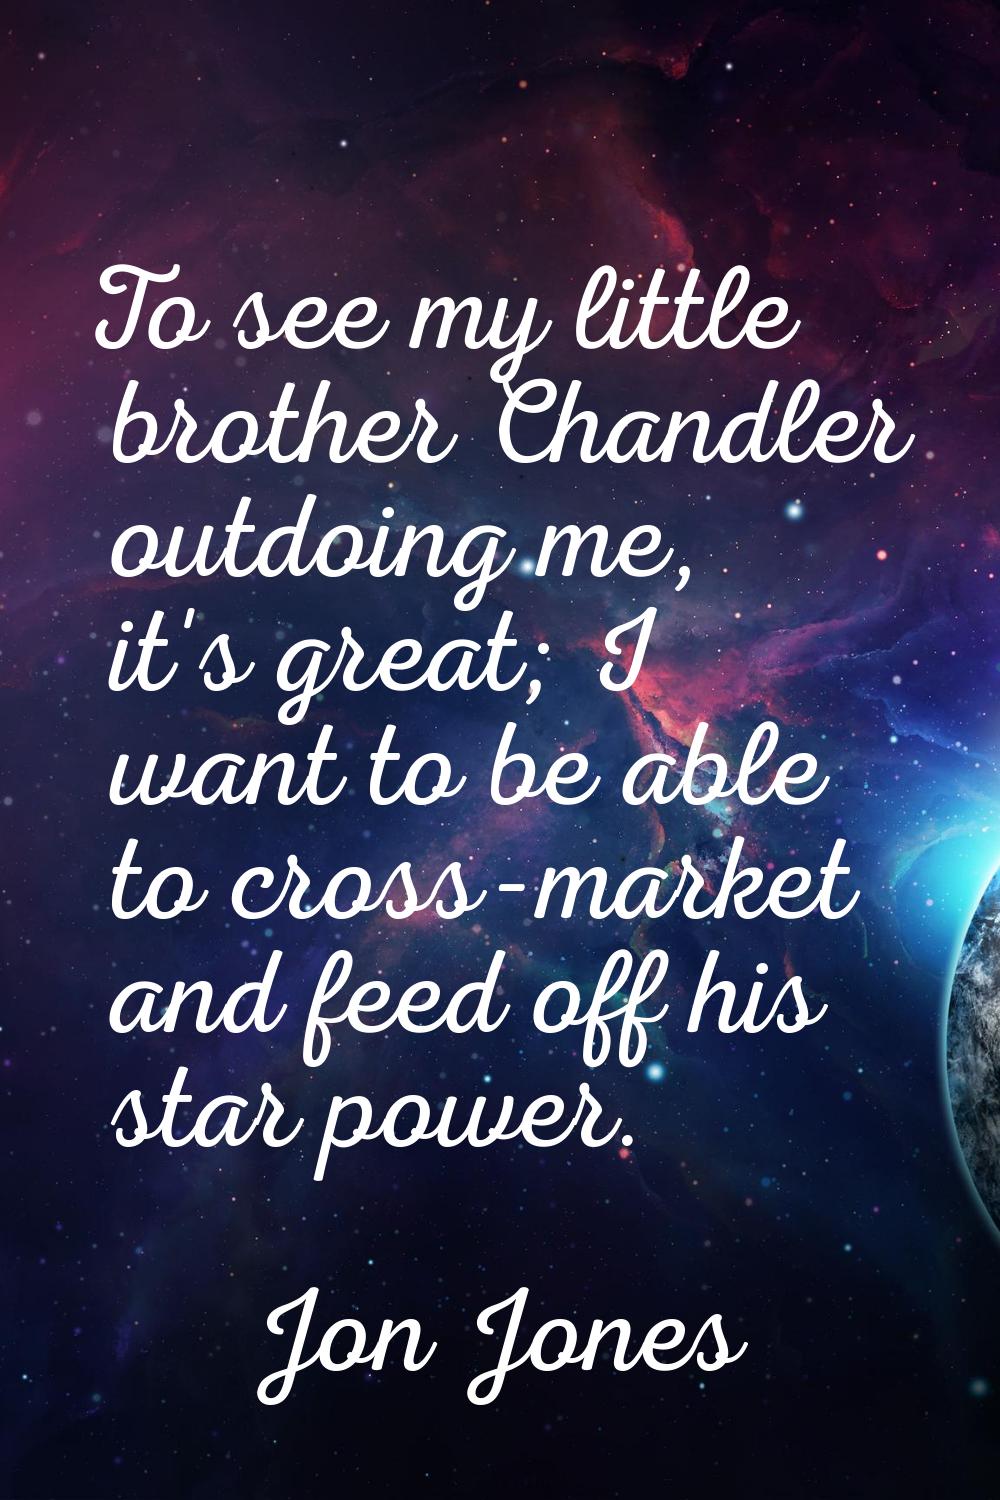 To see my little brother Chandler outdoing me, it's great; I want to be able to cross-market and fe